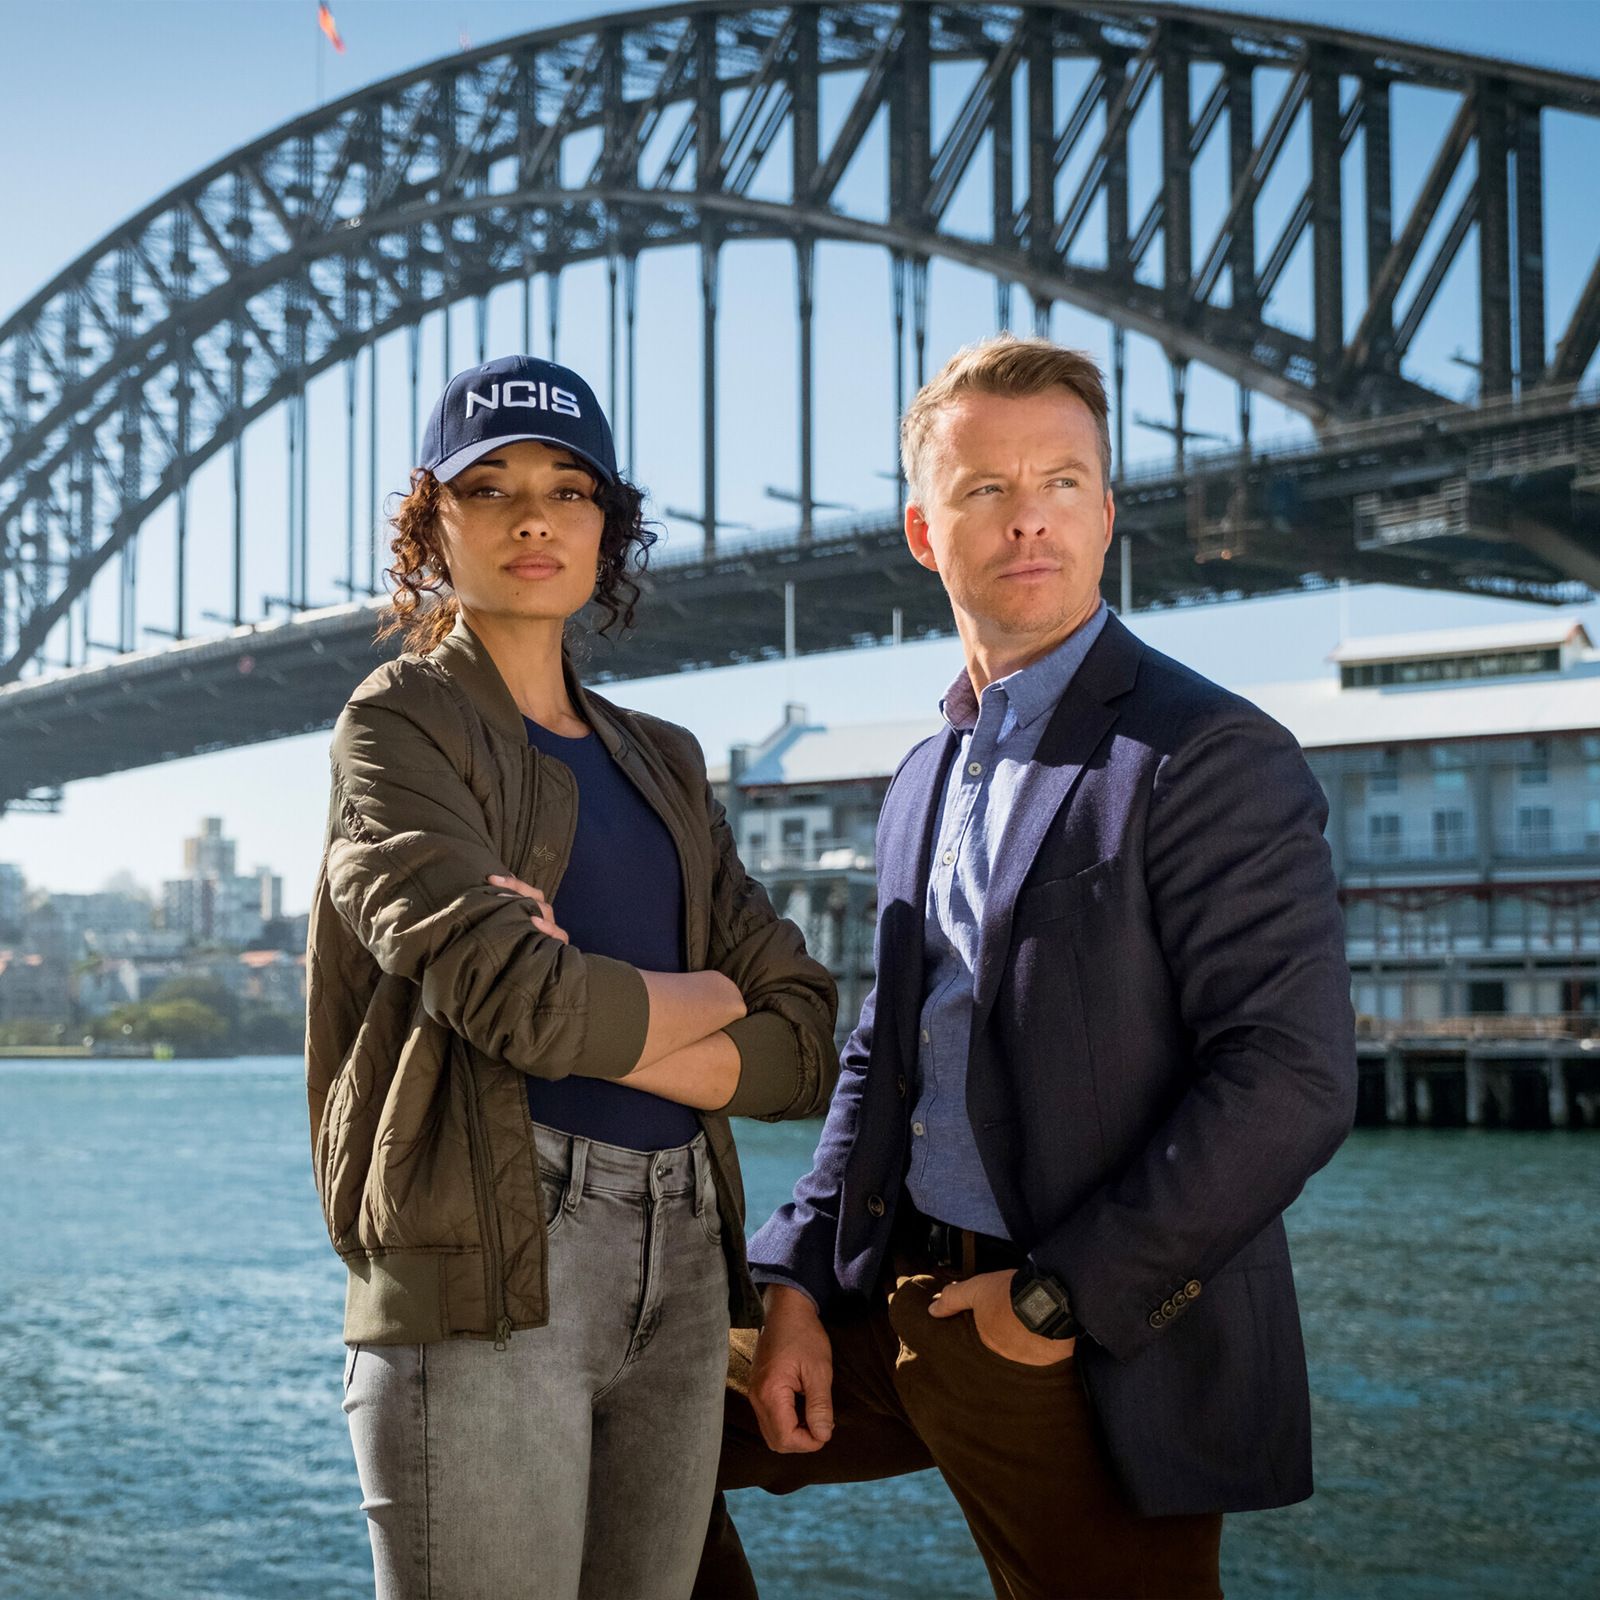 485: Going Down Under (Navally) With NCIS: Sydney